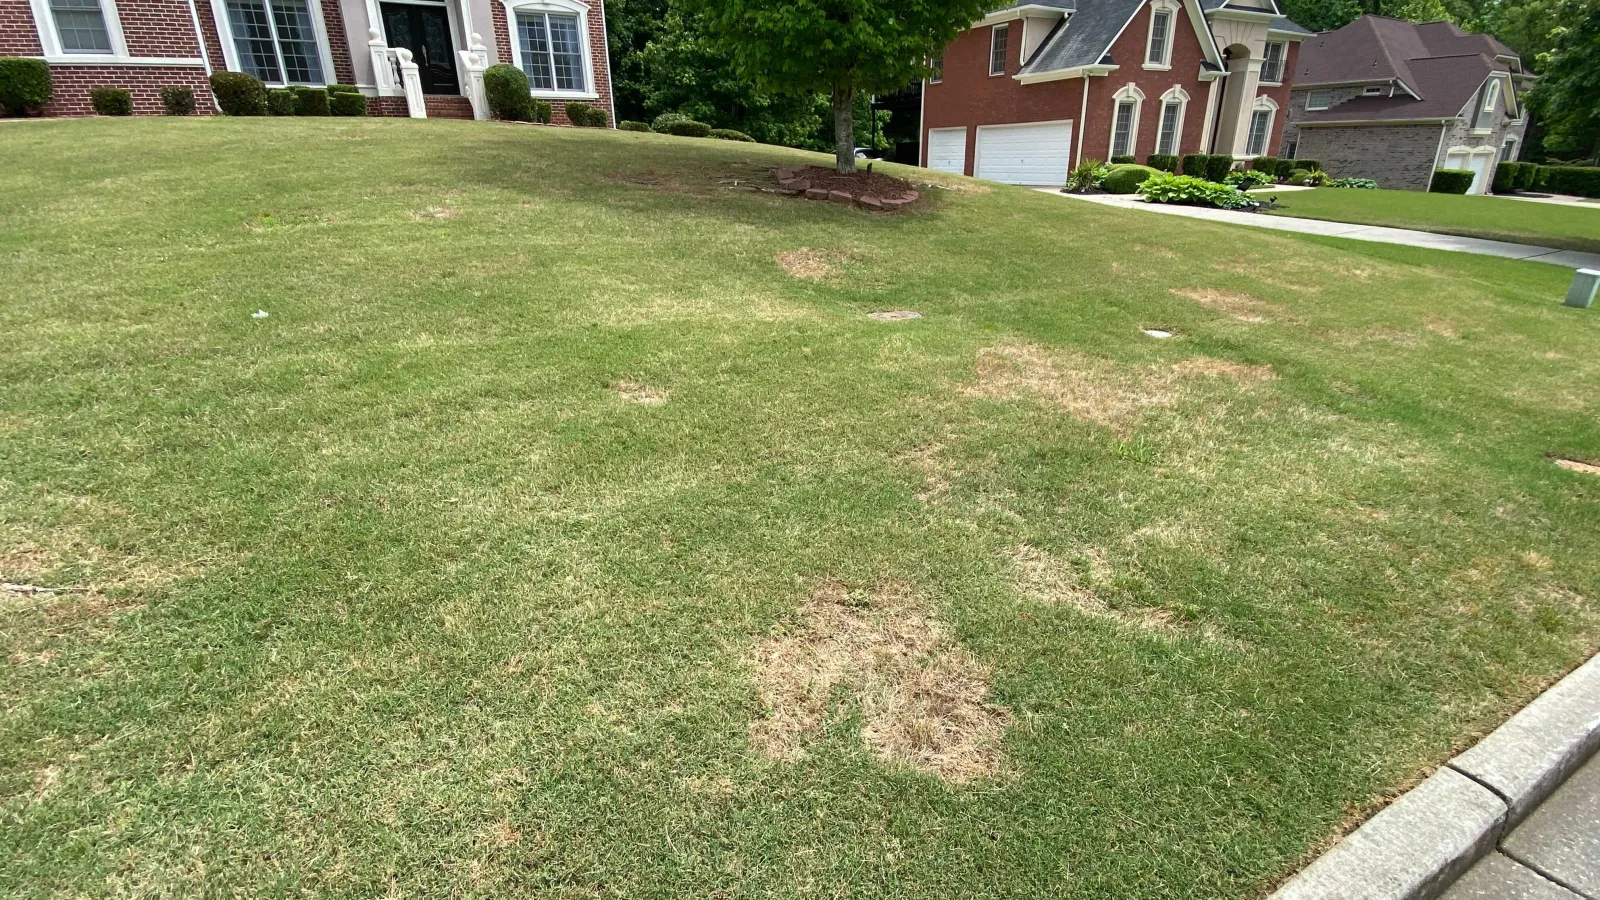 What Are Those ‘Dollars’ In Your Yard?